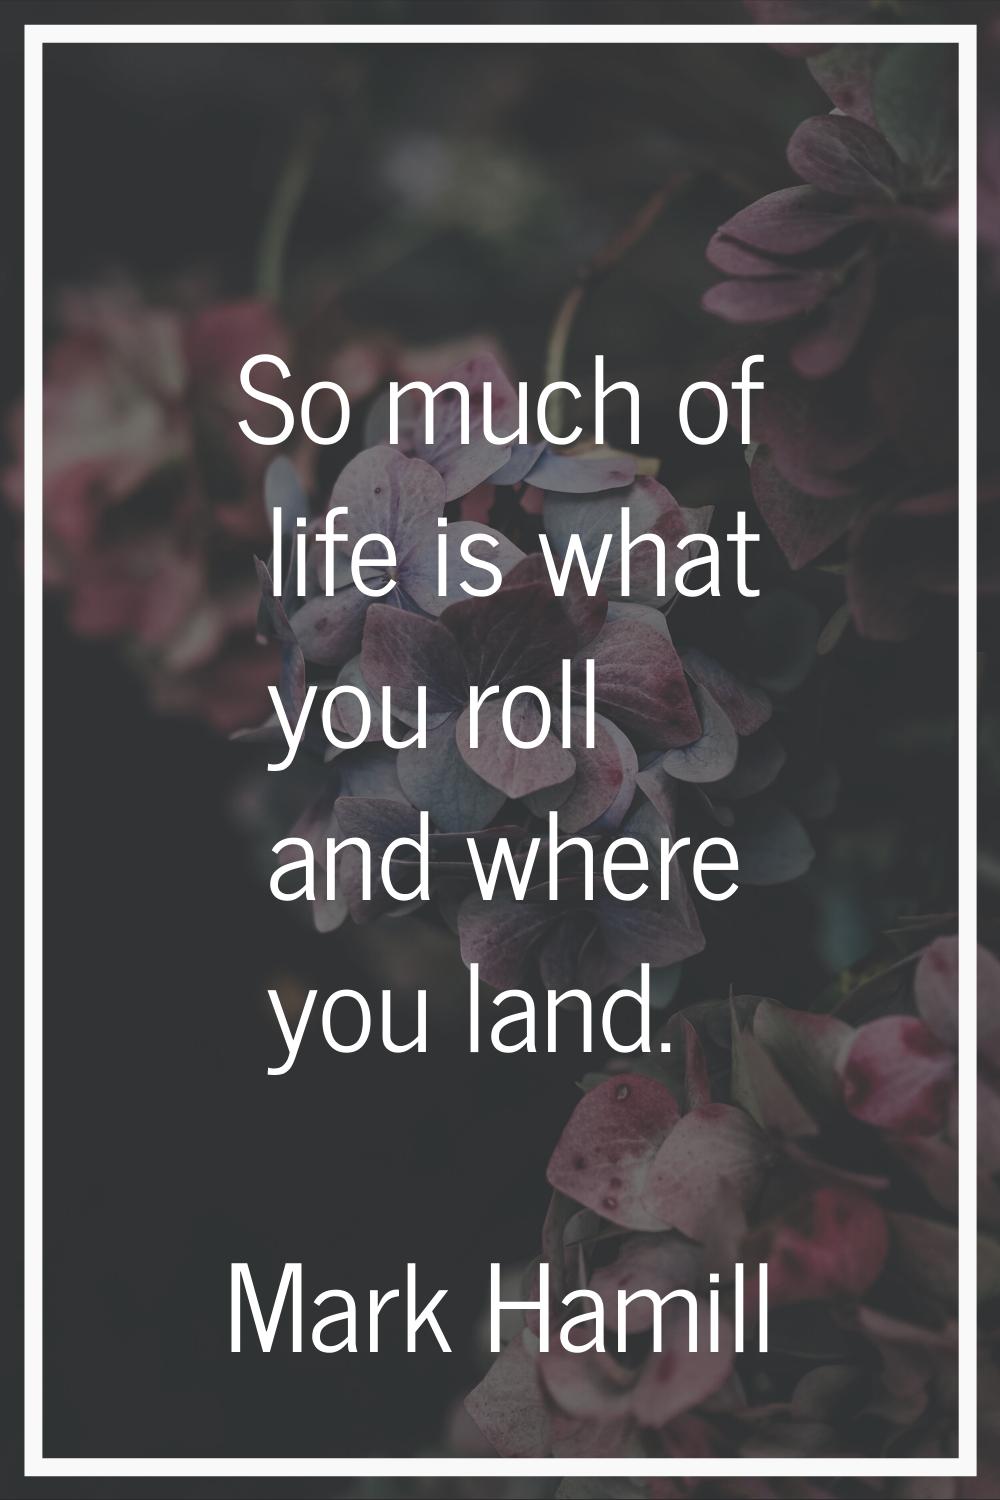 So much of life is what you roll and where you land.